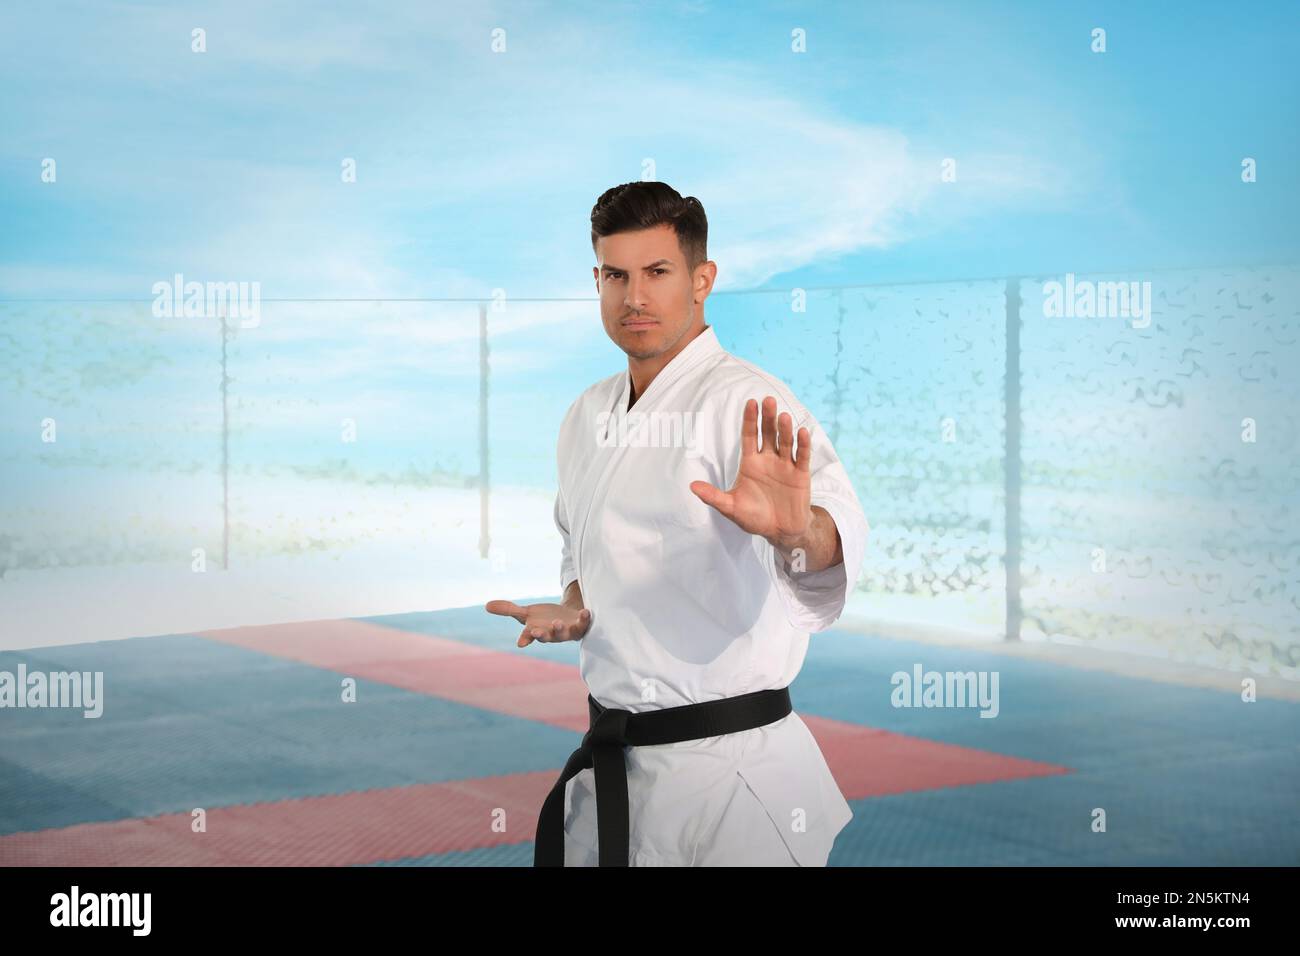 Professional coach showing karate moves at gym Stock Photo